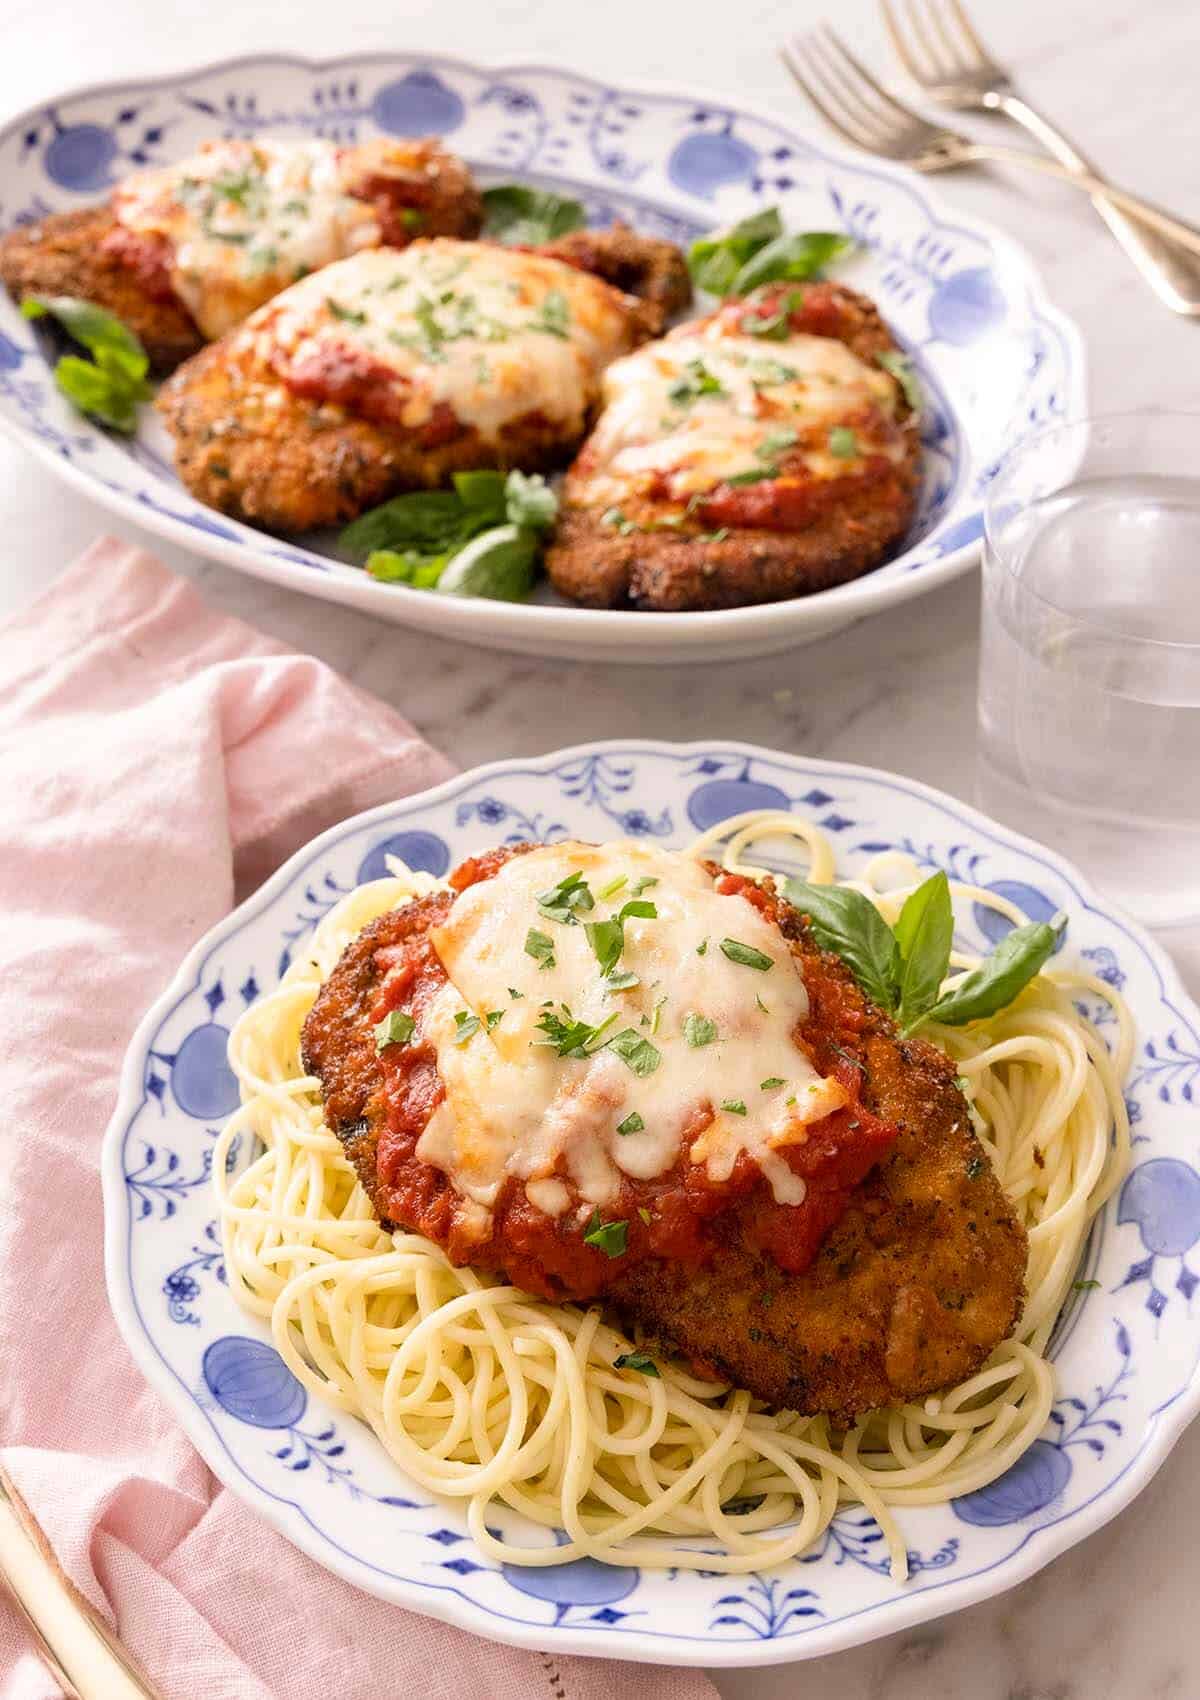 Chicken parmesan on a blue plate with spaghetti